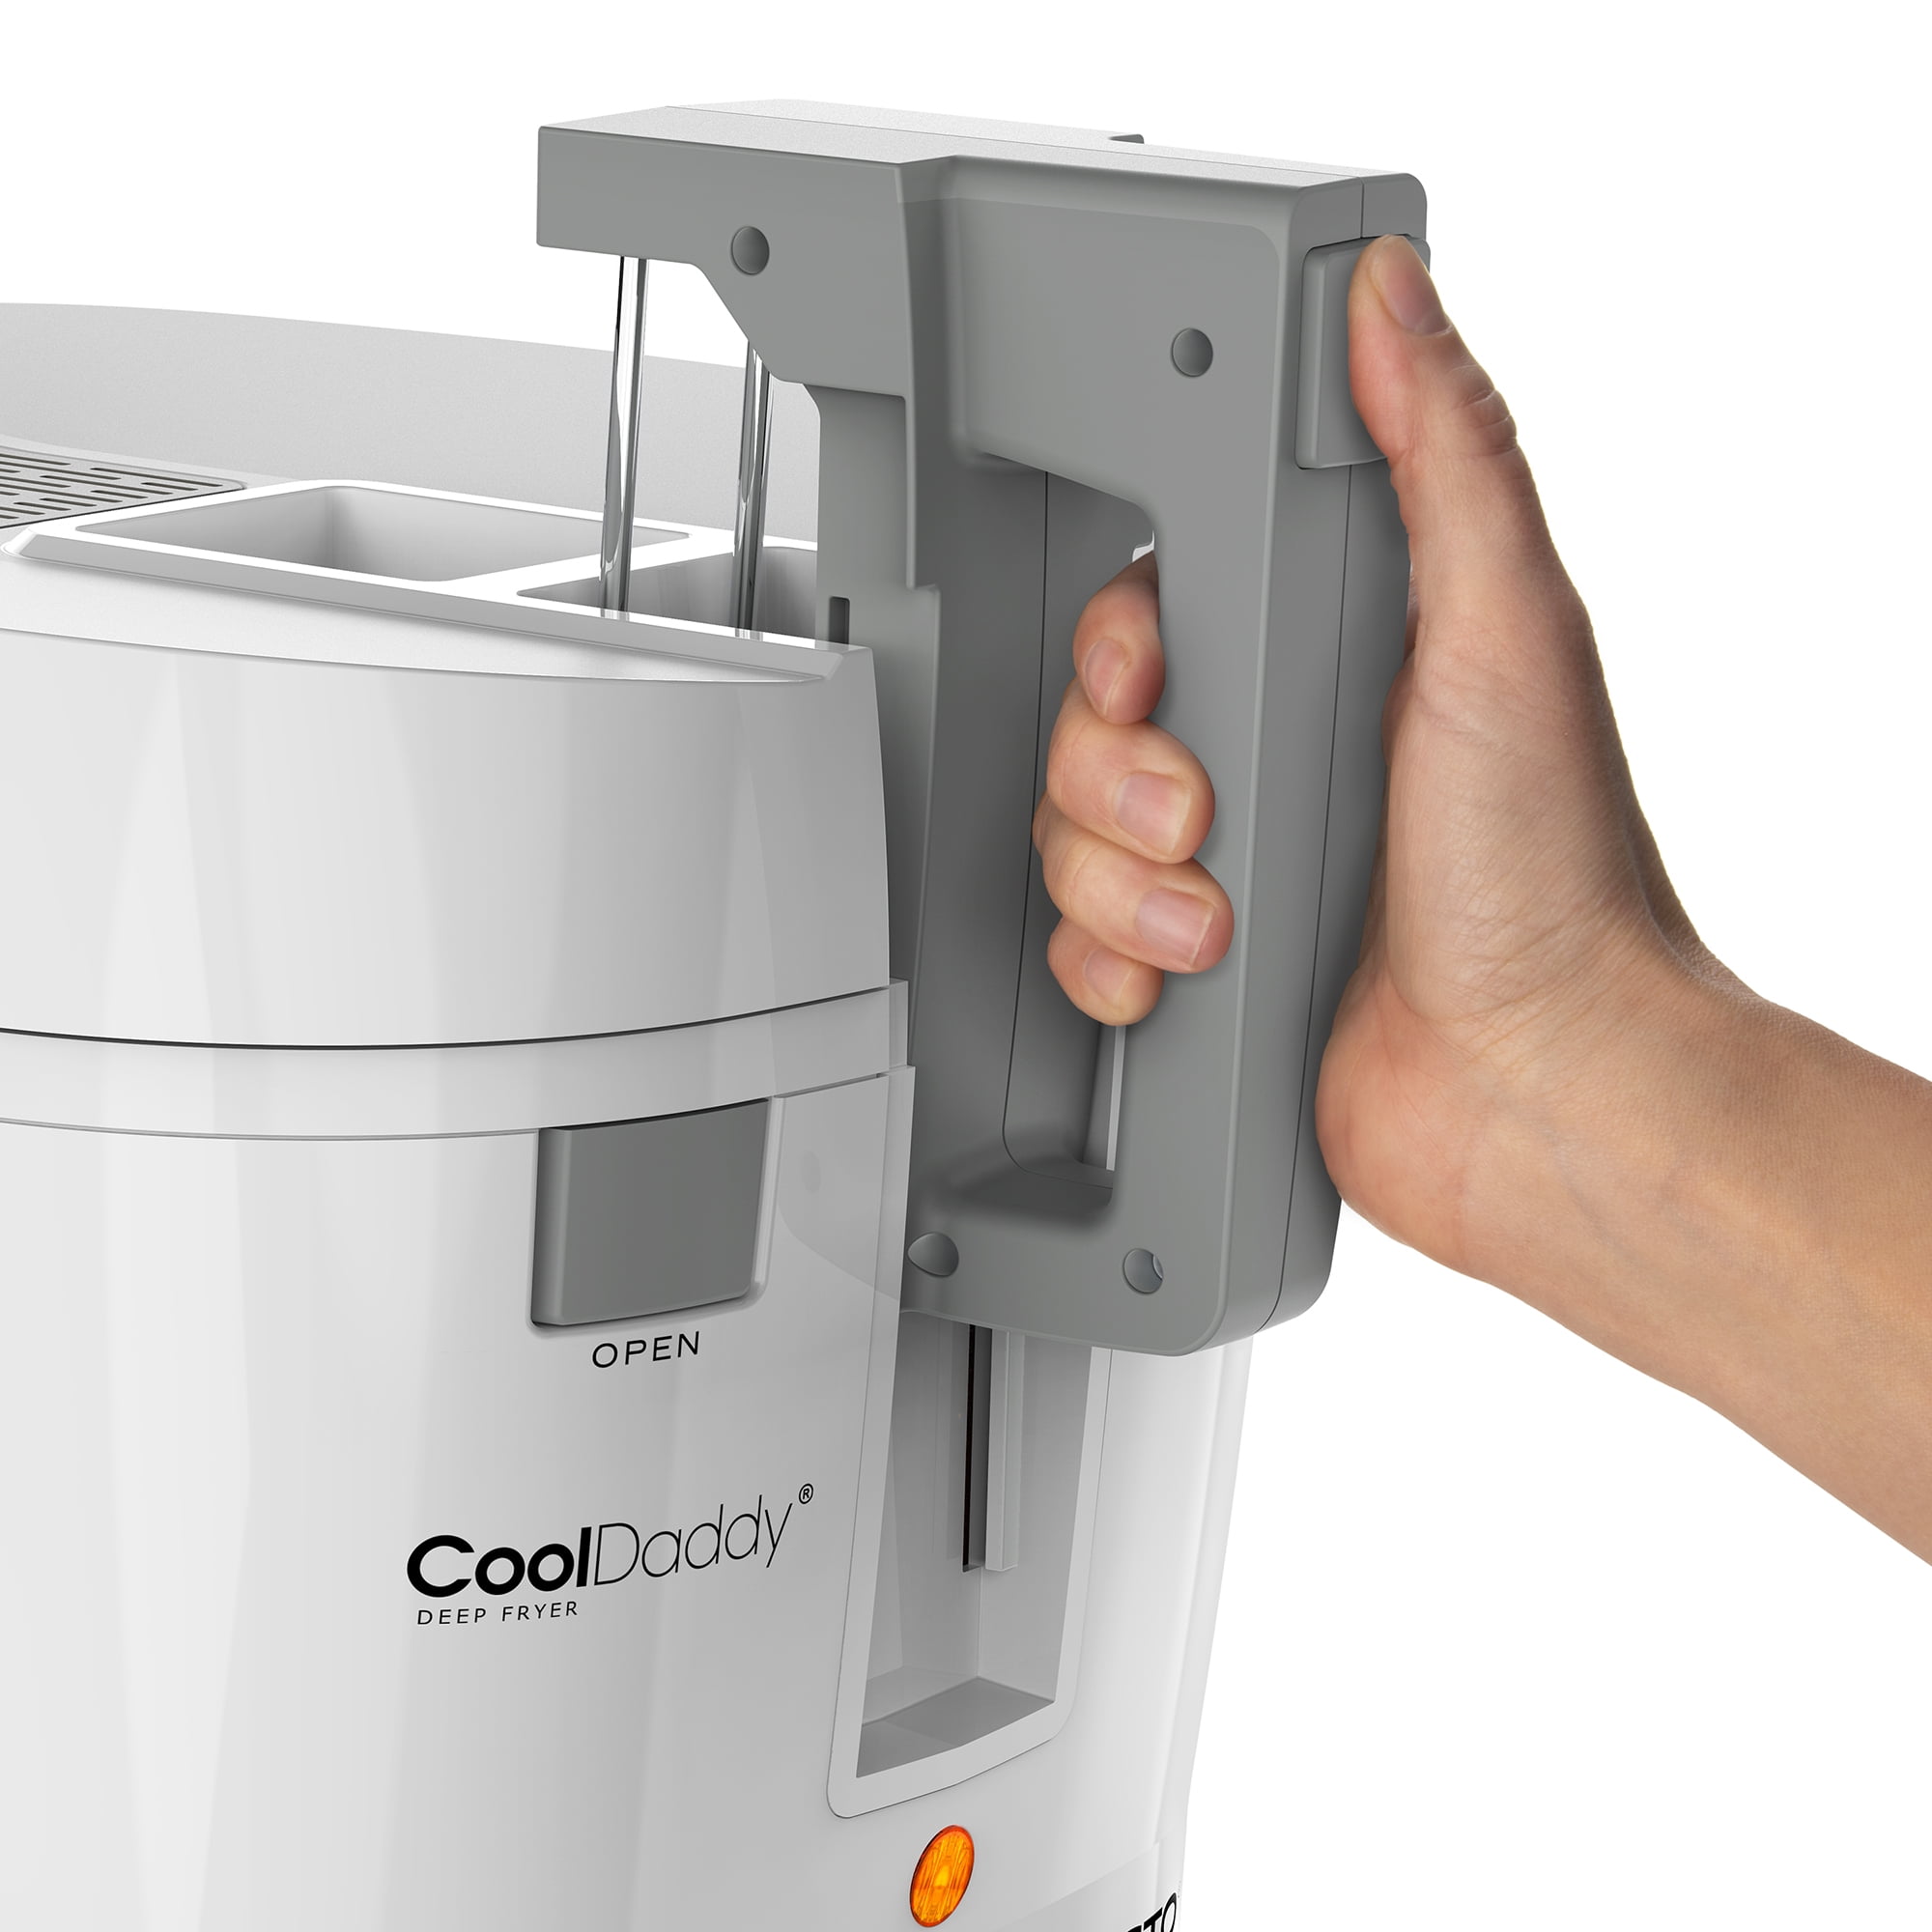 CoolDaddy® cool-touch deep fryer - Product Info - Video - Presto®